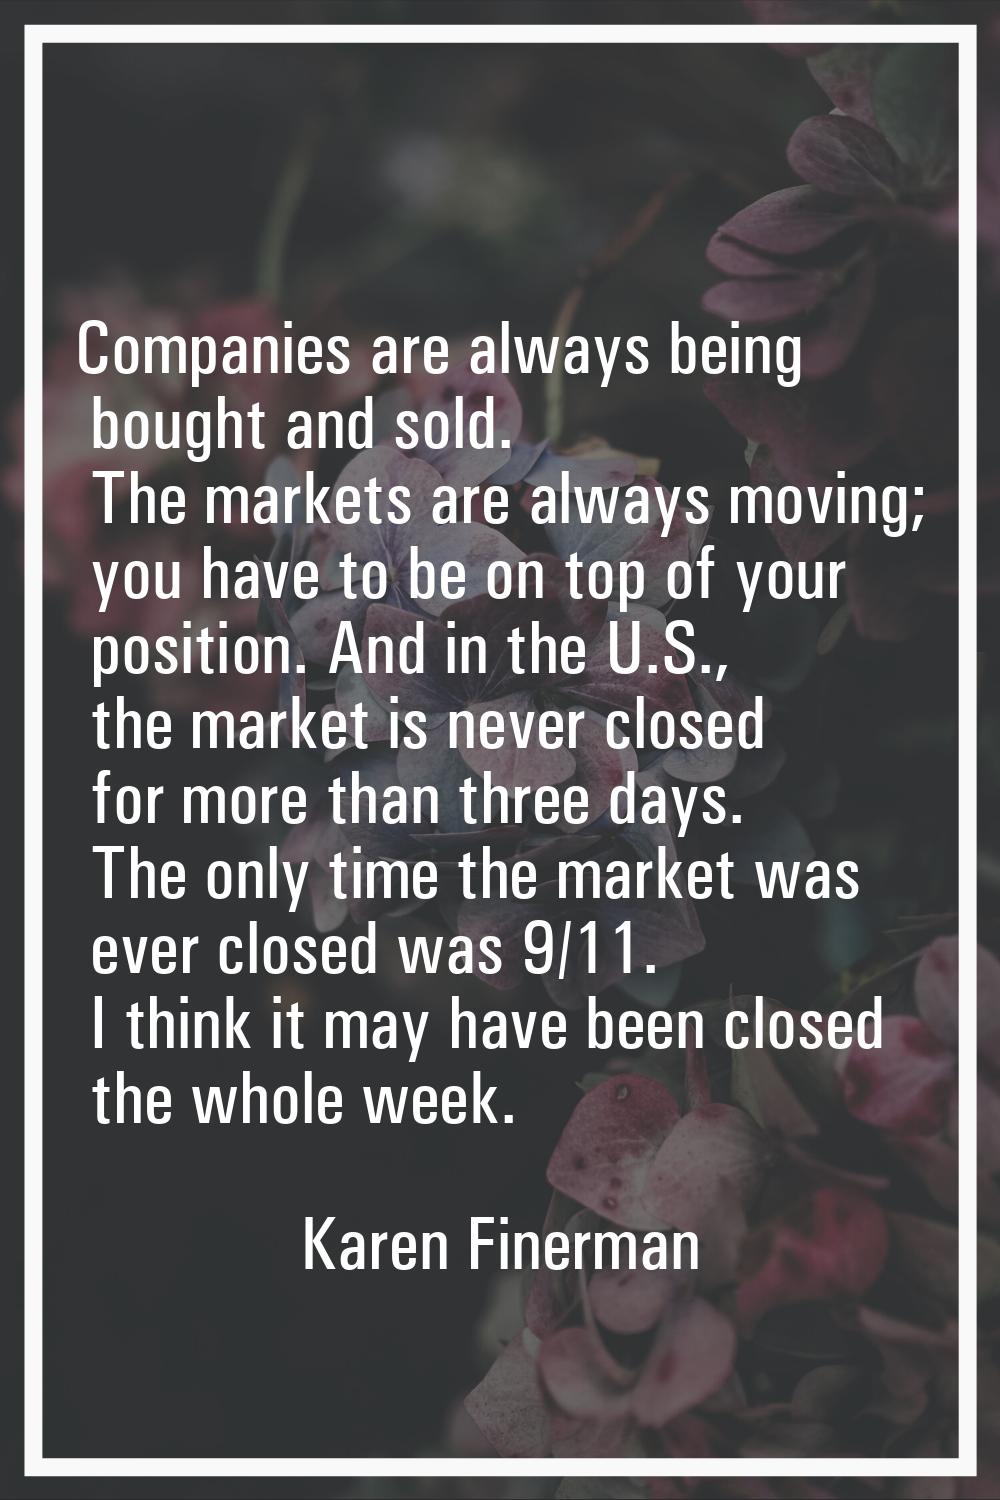 Companies are always being bought and sold. The markets are always moving; you have to be on top of